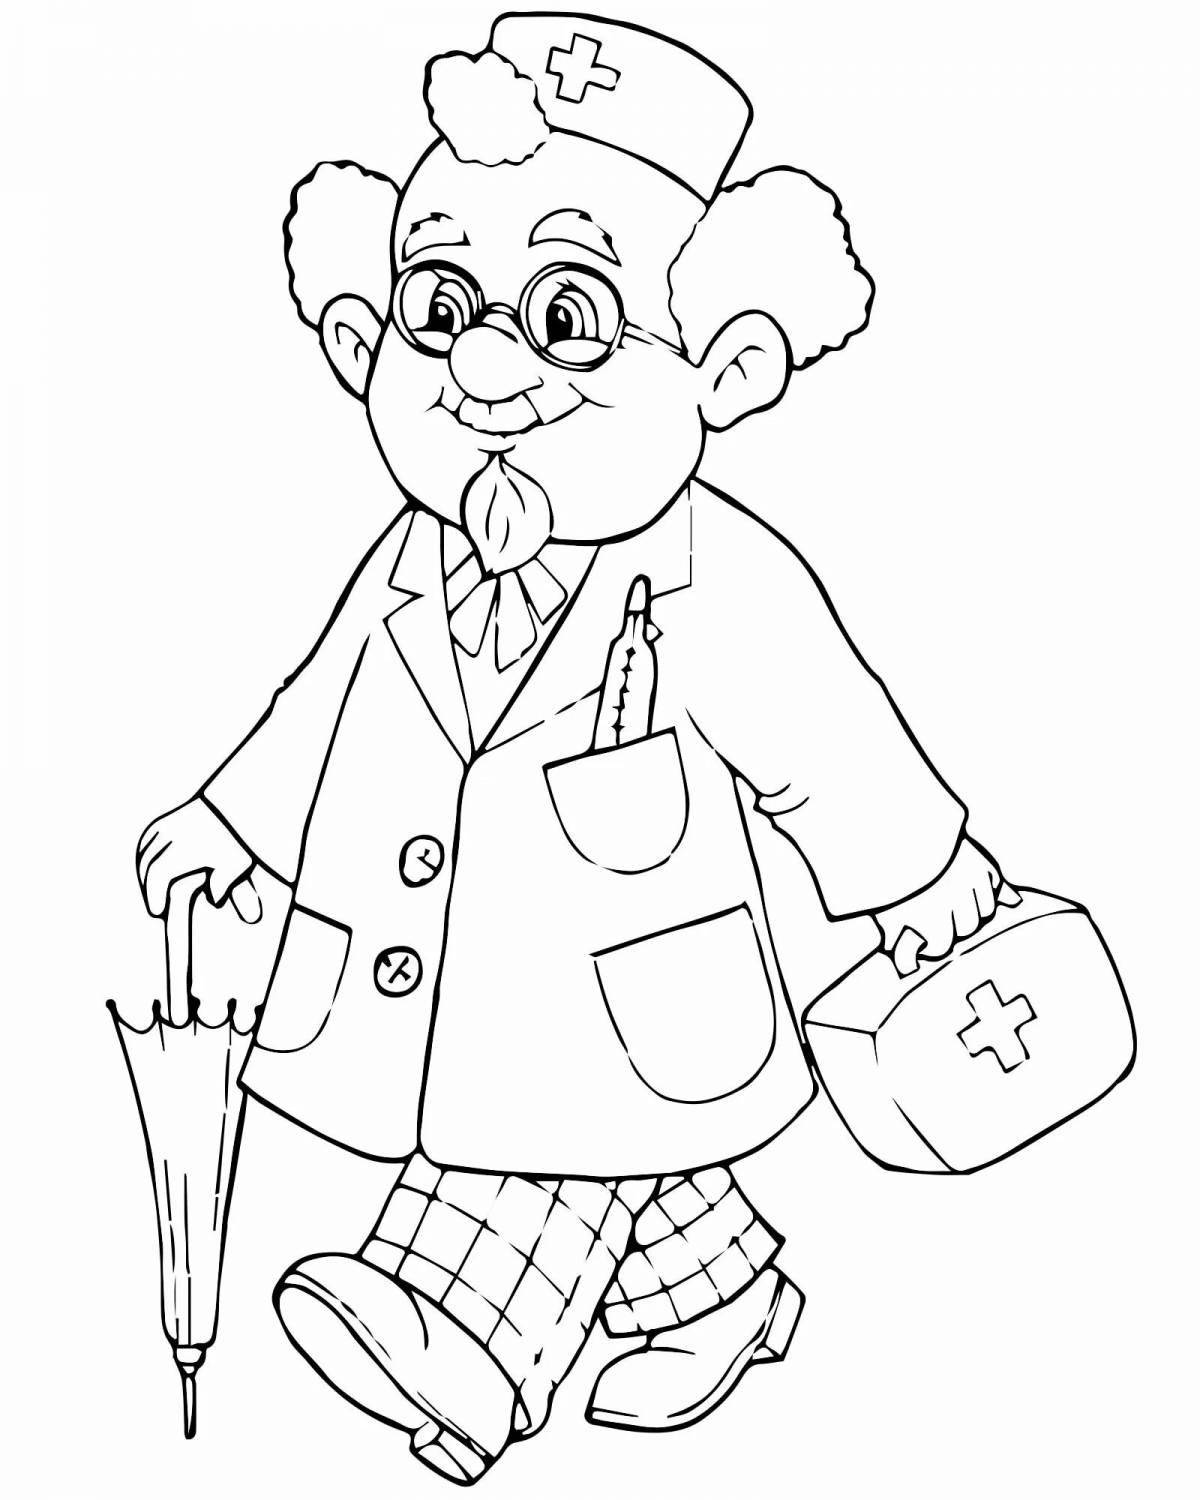 Dr Doctor Coloring Page with Rich Colors